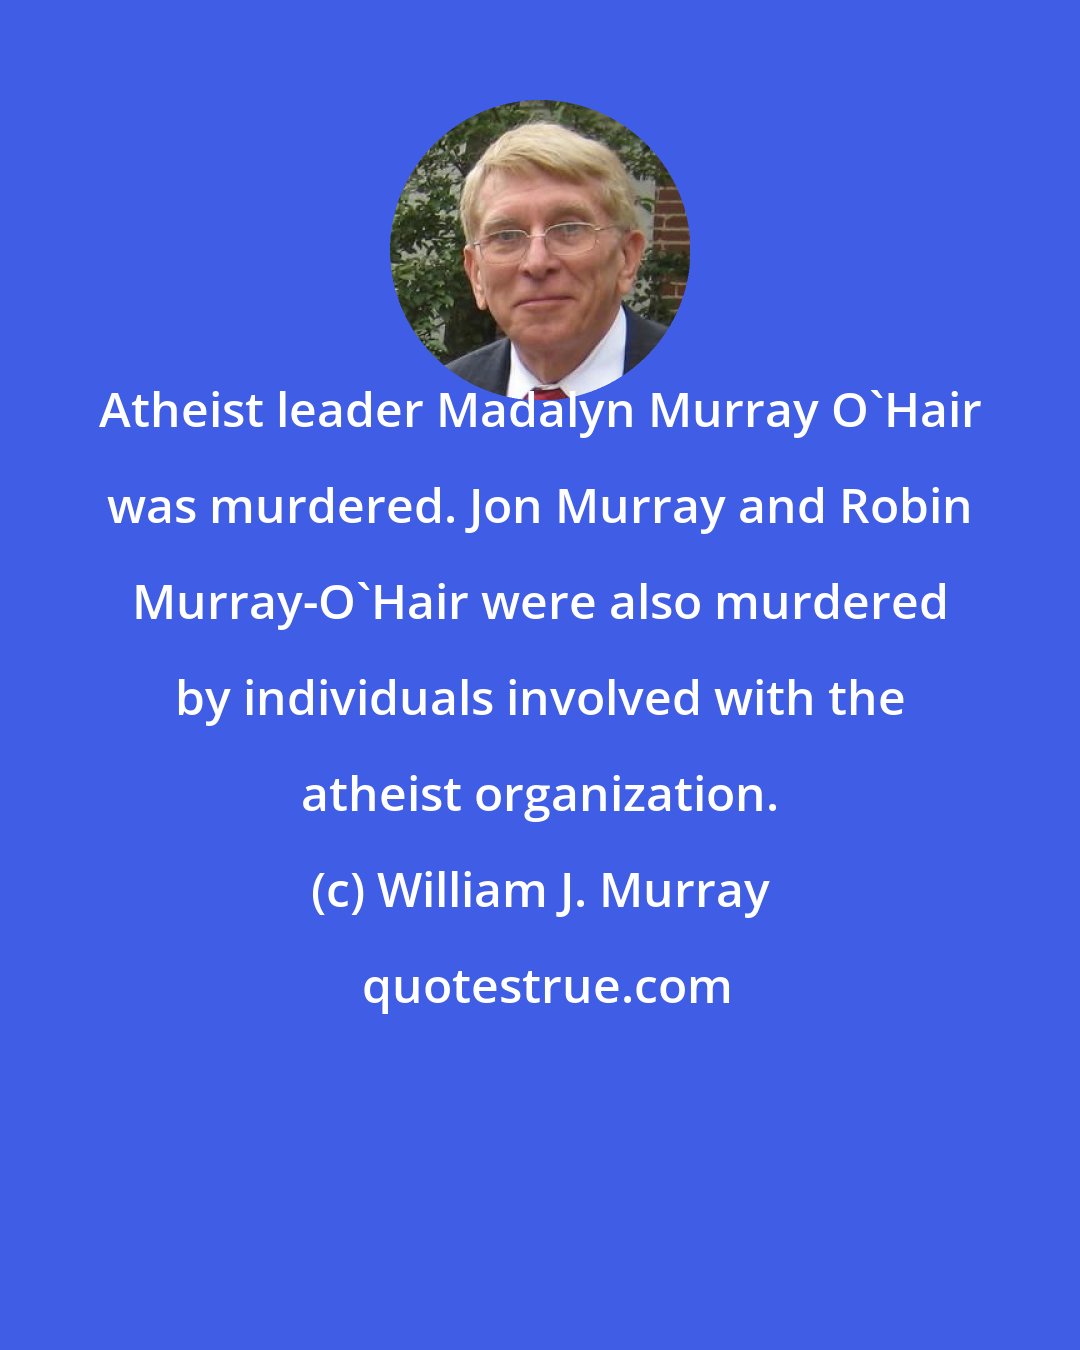 William J. Murray: Atheist leader Madalyn Murray O'Hair was murdered. Jon Murray and Robin Murray-O'Hair were also murdered by individuals involved with the atheist organization.